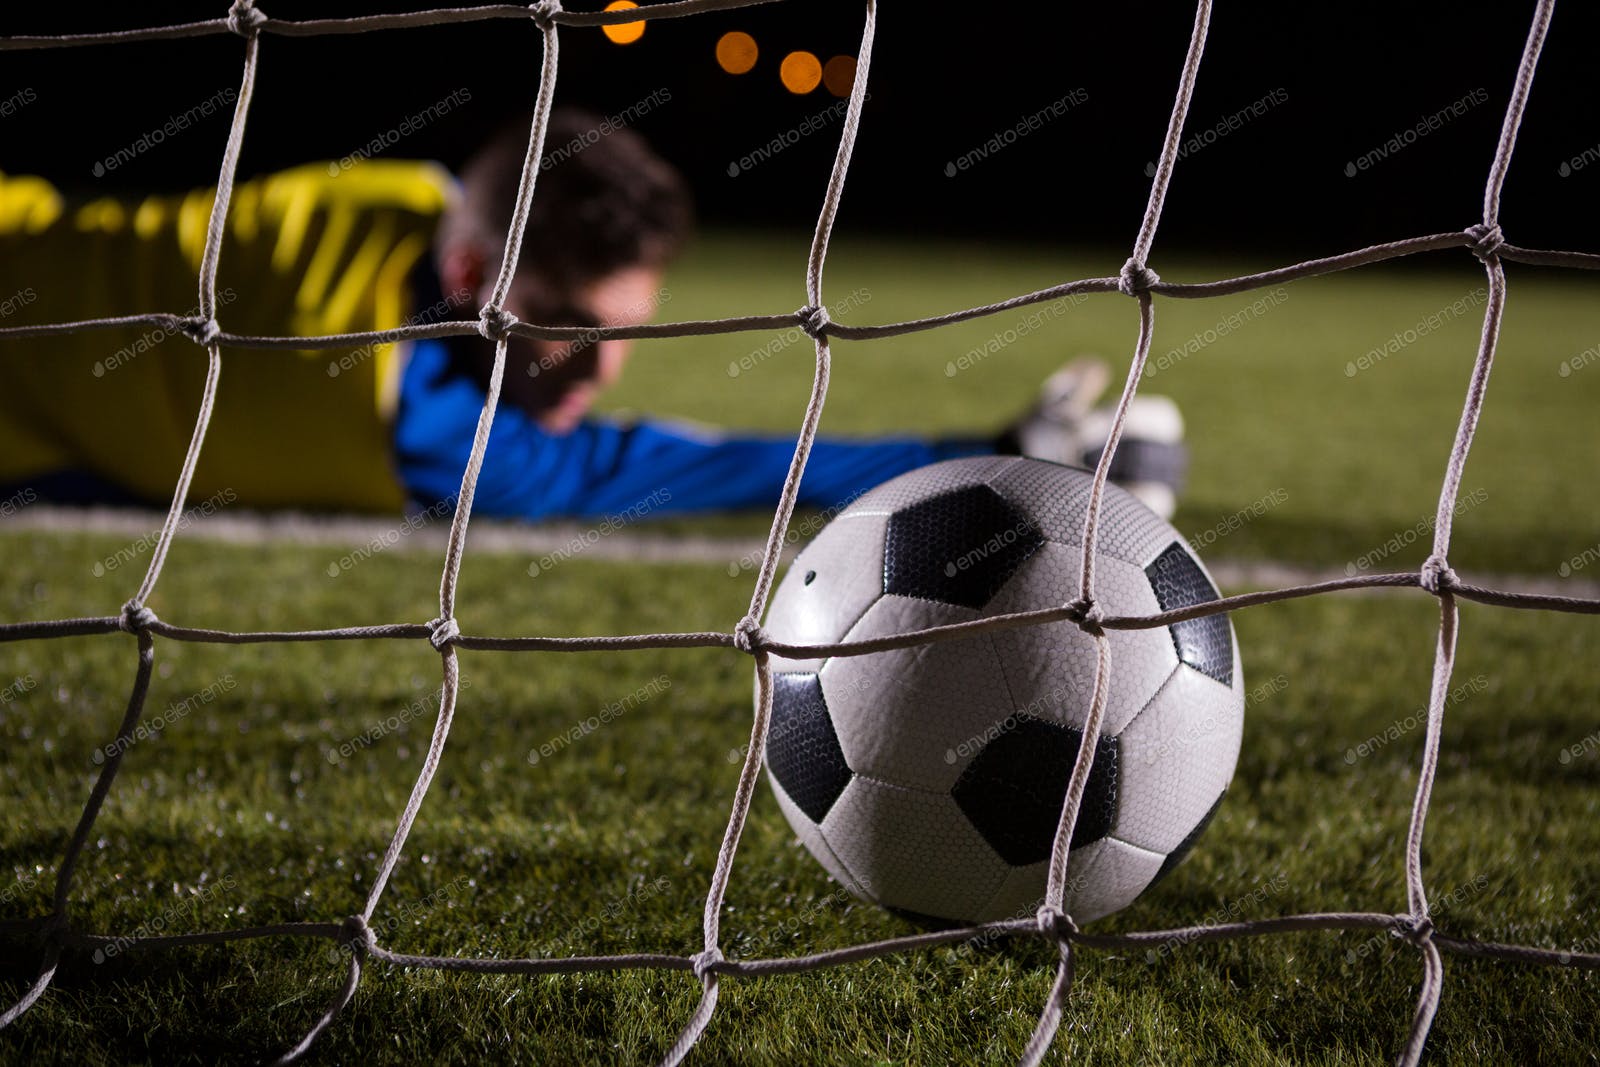 Close Up Of Soccer Ball In Goal Post Against Goalkeeper Photo By Wavebreakmedia On Envato Elements